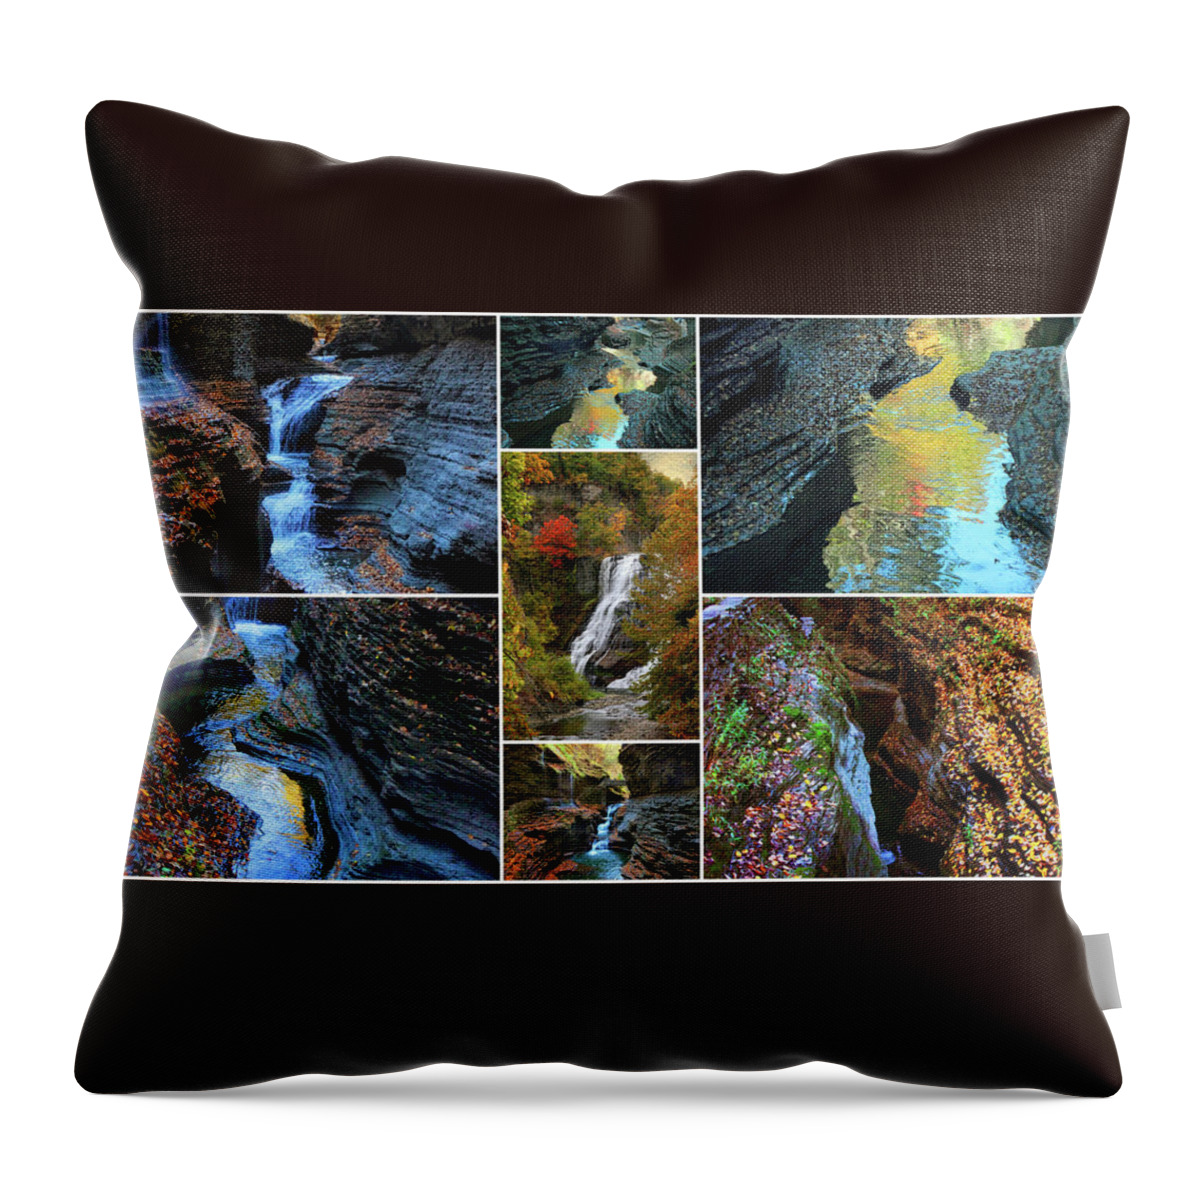 Finger Lakes Throw Pillow featuring the photograph Finger Lakes Gorges Collage by Jessica Jenney